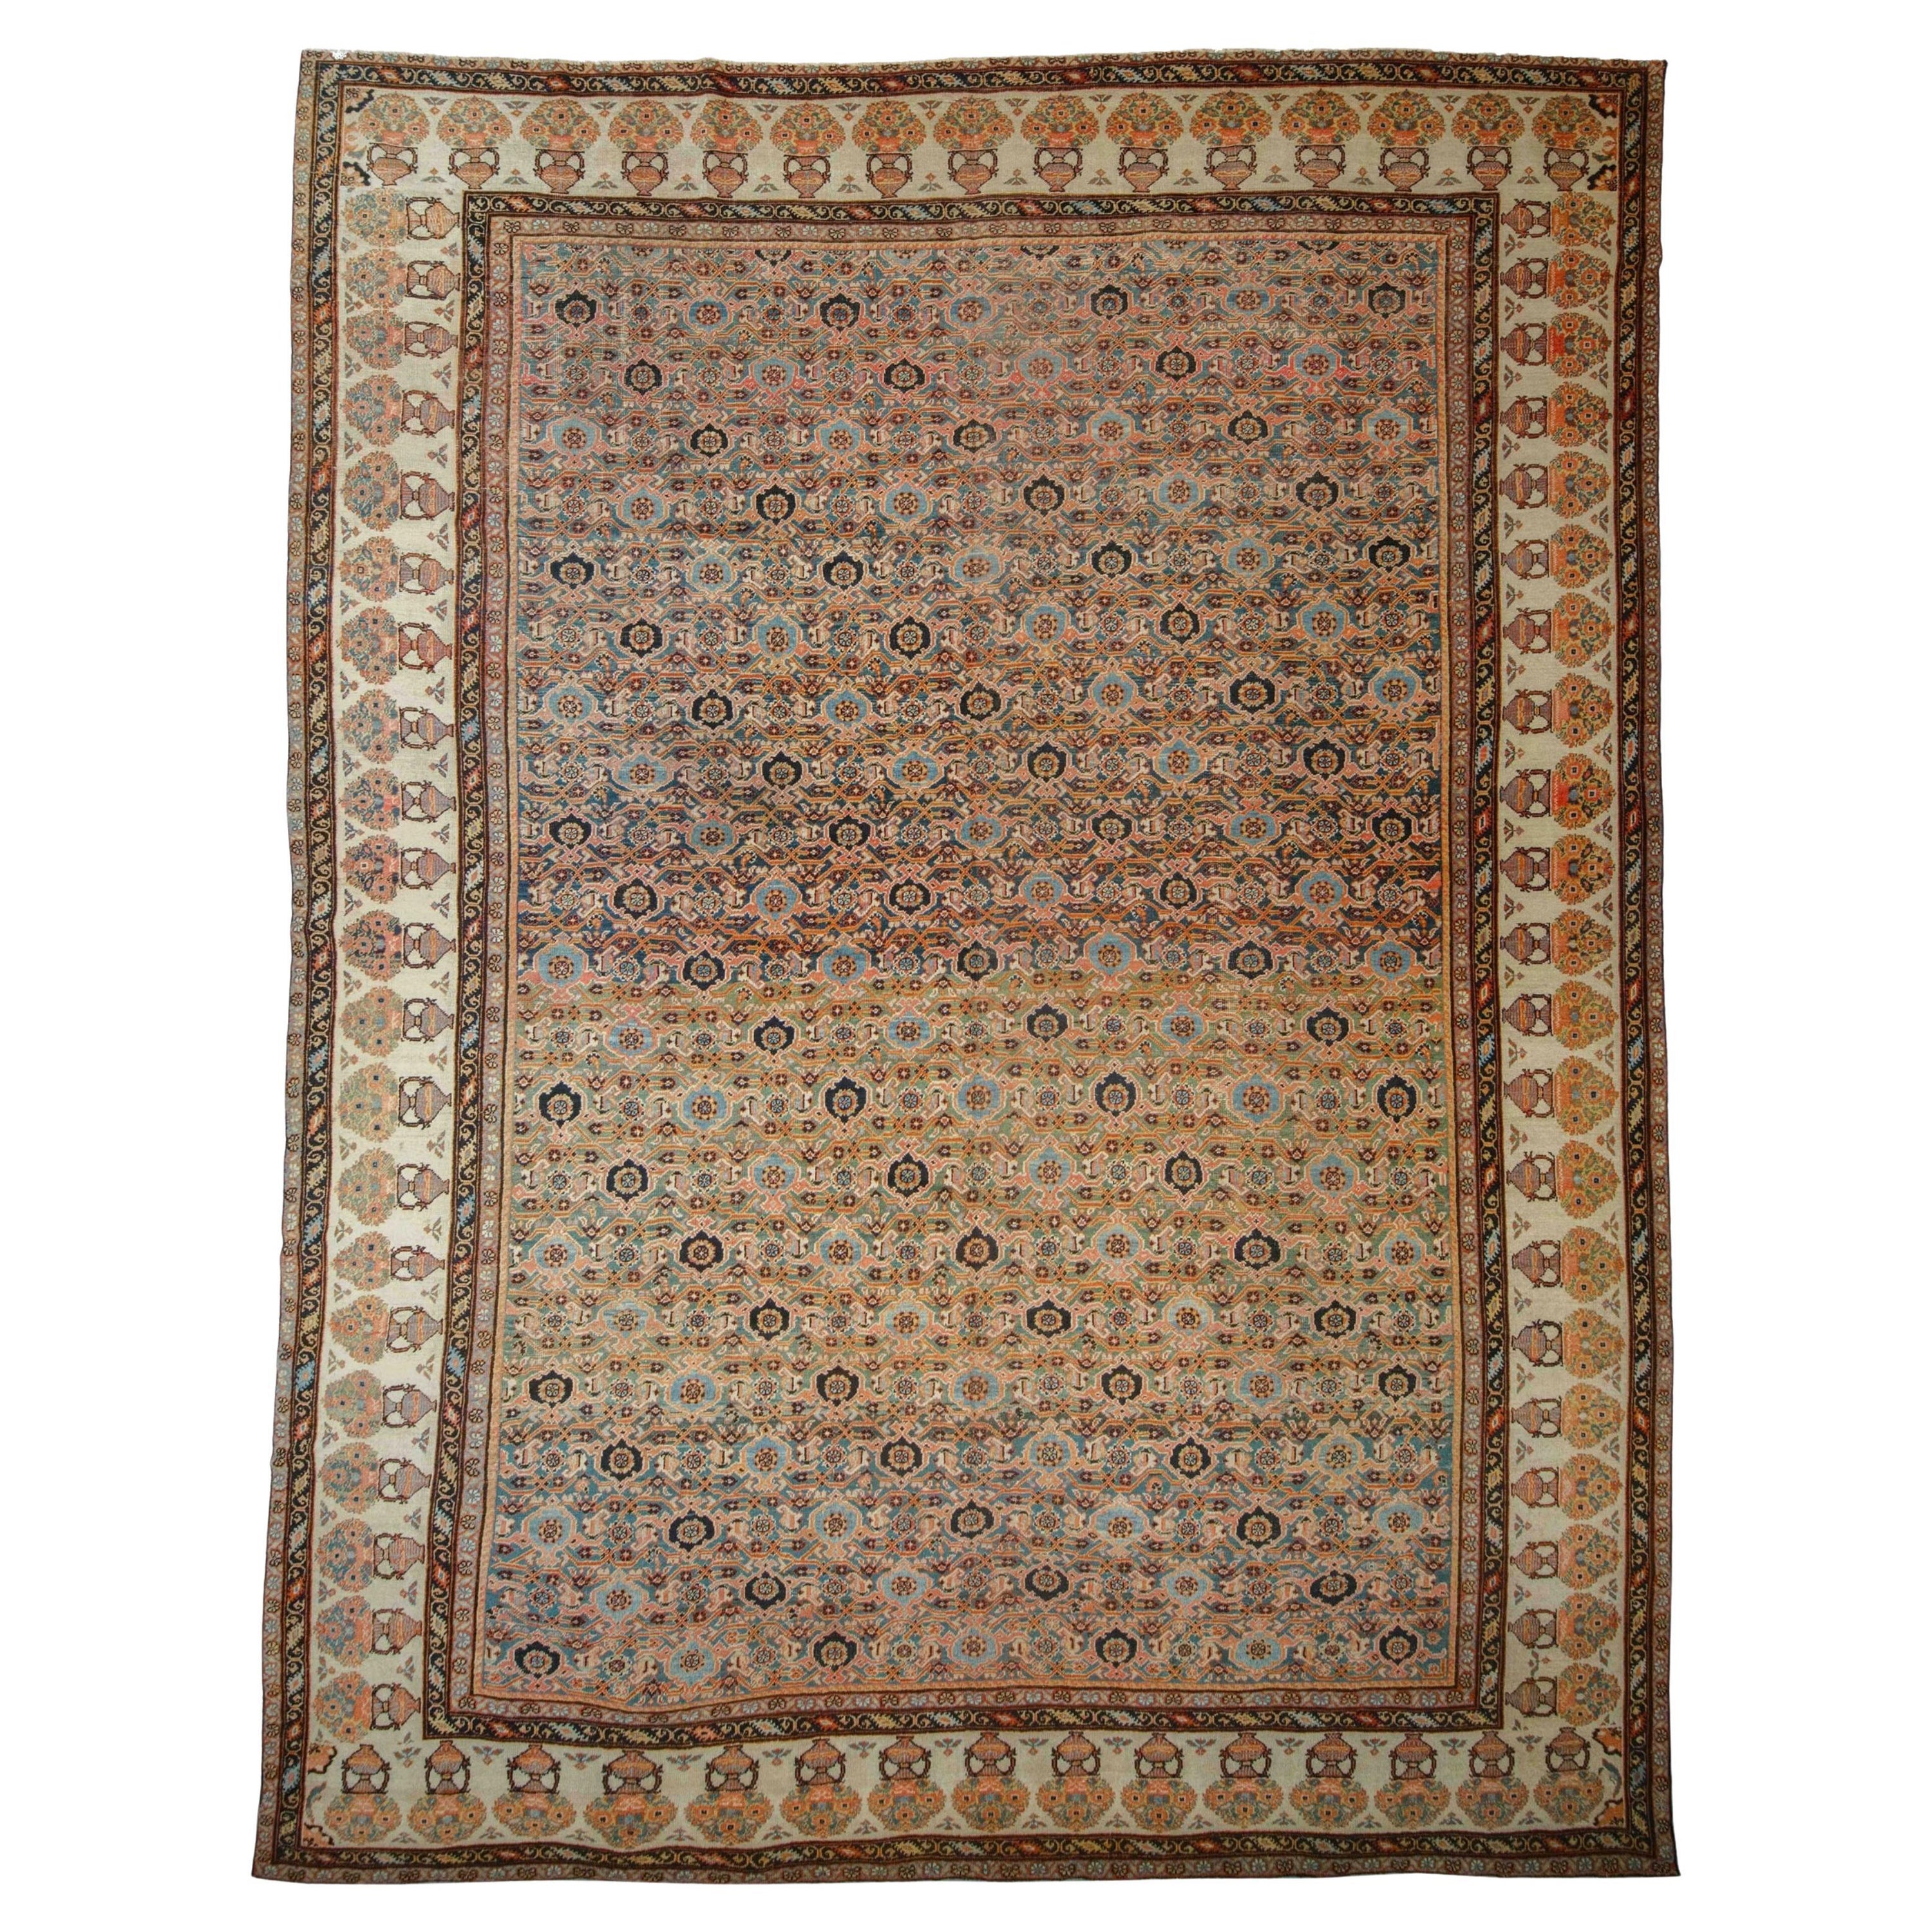 Antique Mahal Carpet - Late of 19th Century Mahal Rug, Antique Rug For Sale